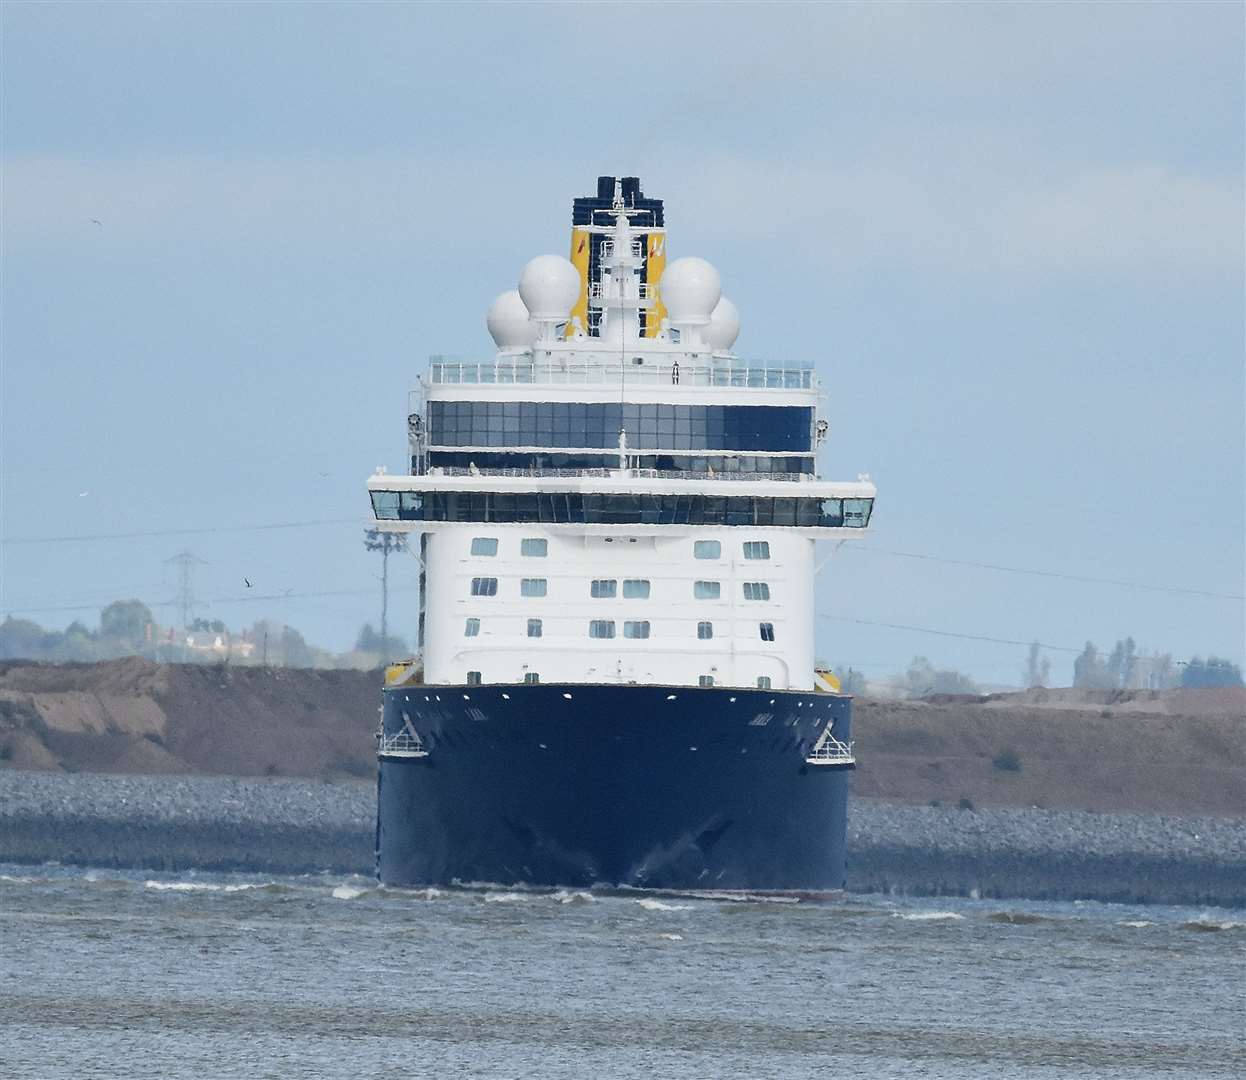 The ship is understood to have docked at the Port of Tilbury, before setting out again. Picture: jason.photos